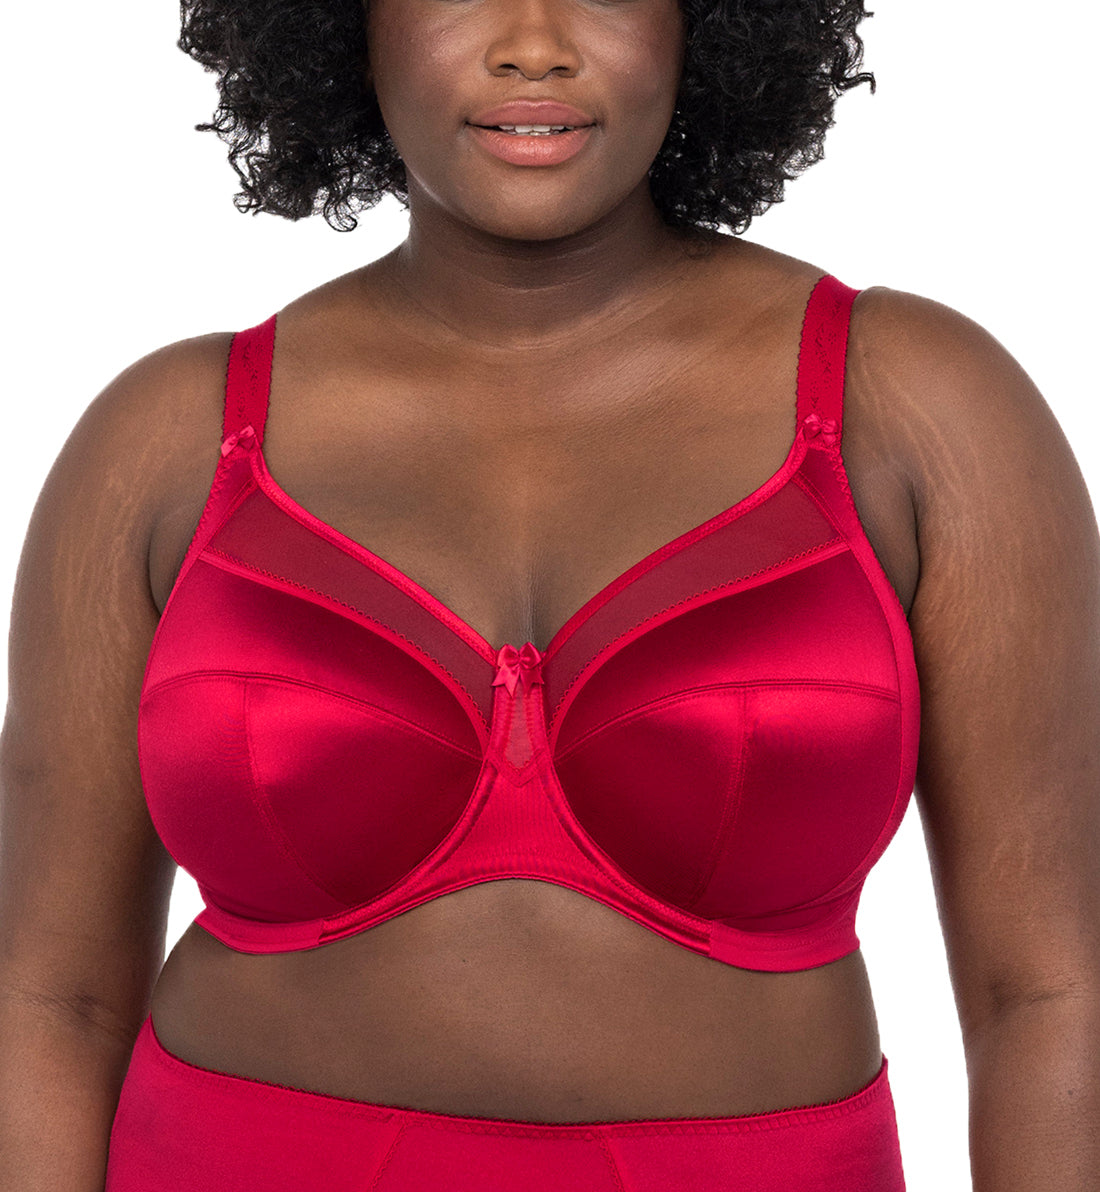 Buy Goddess Women's Plus Size Keira Underwire Banded Bra, Cinnamon, 34L at